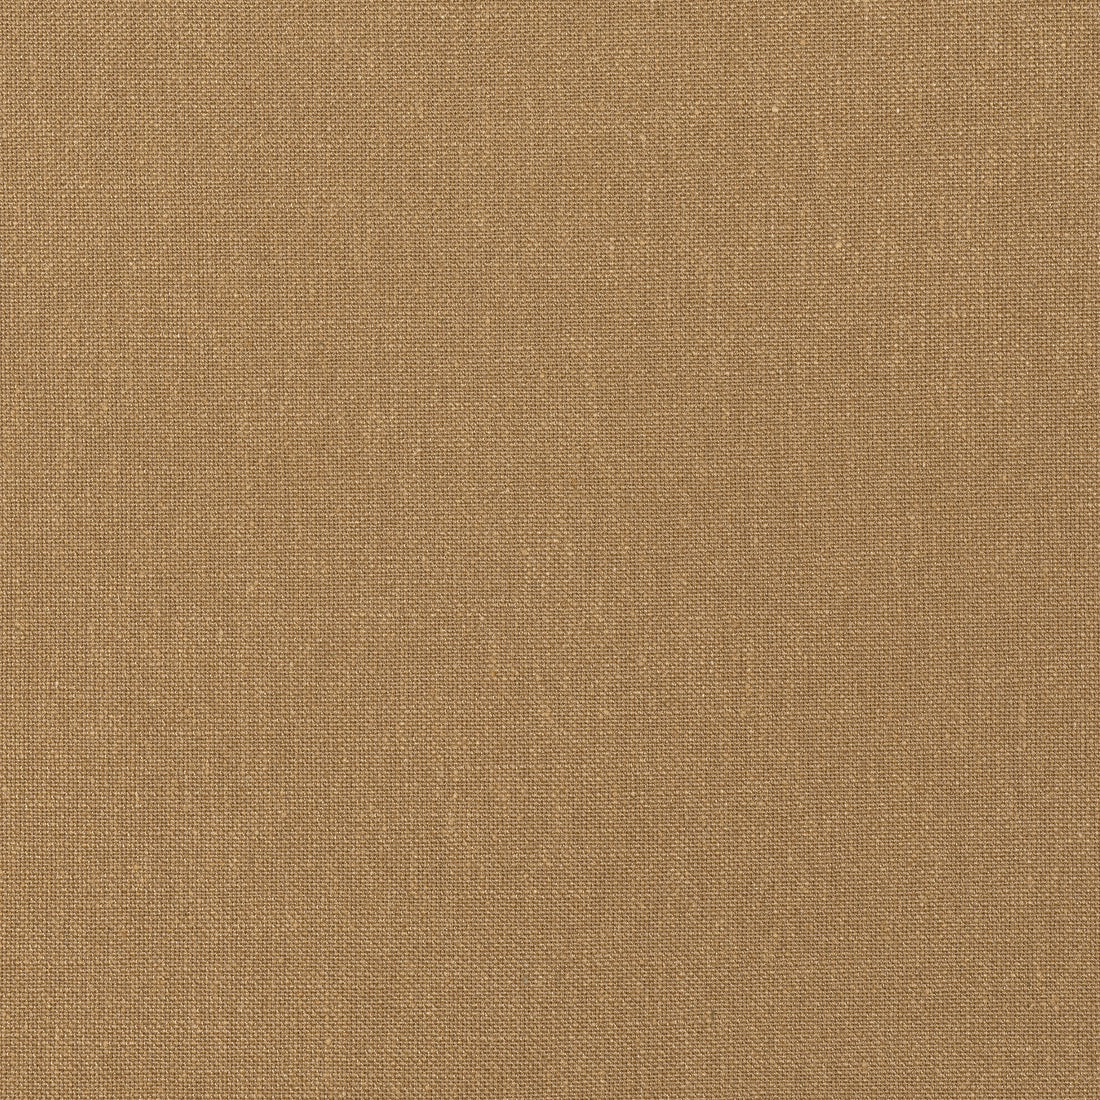 Palisade Linen fabric in camel color - pattern number FWW7658 - by Thibaut in the Palisades collection